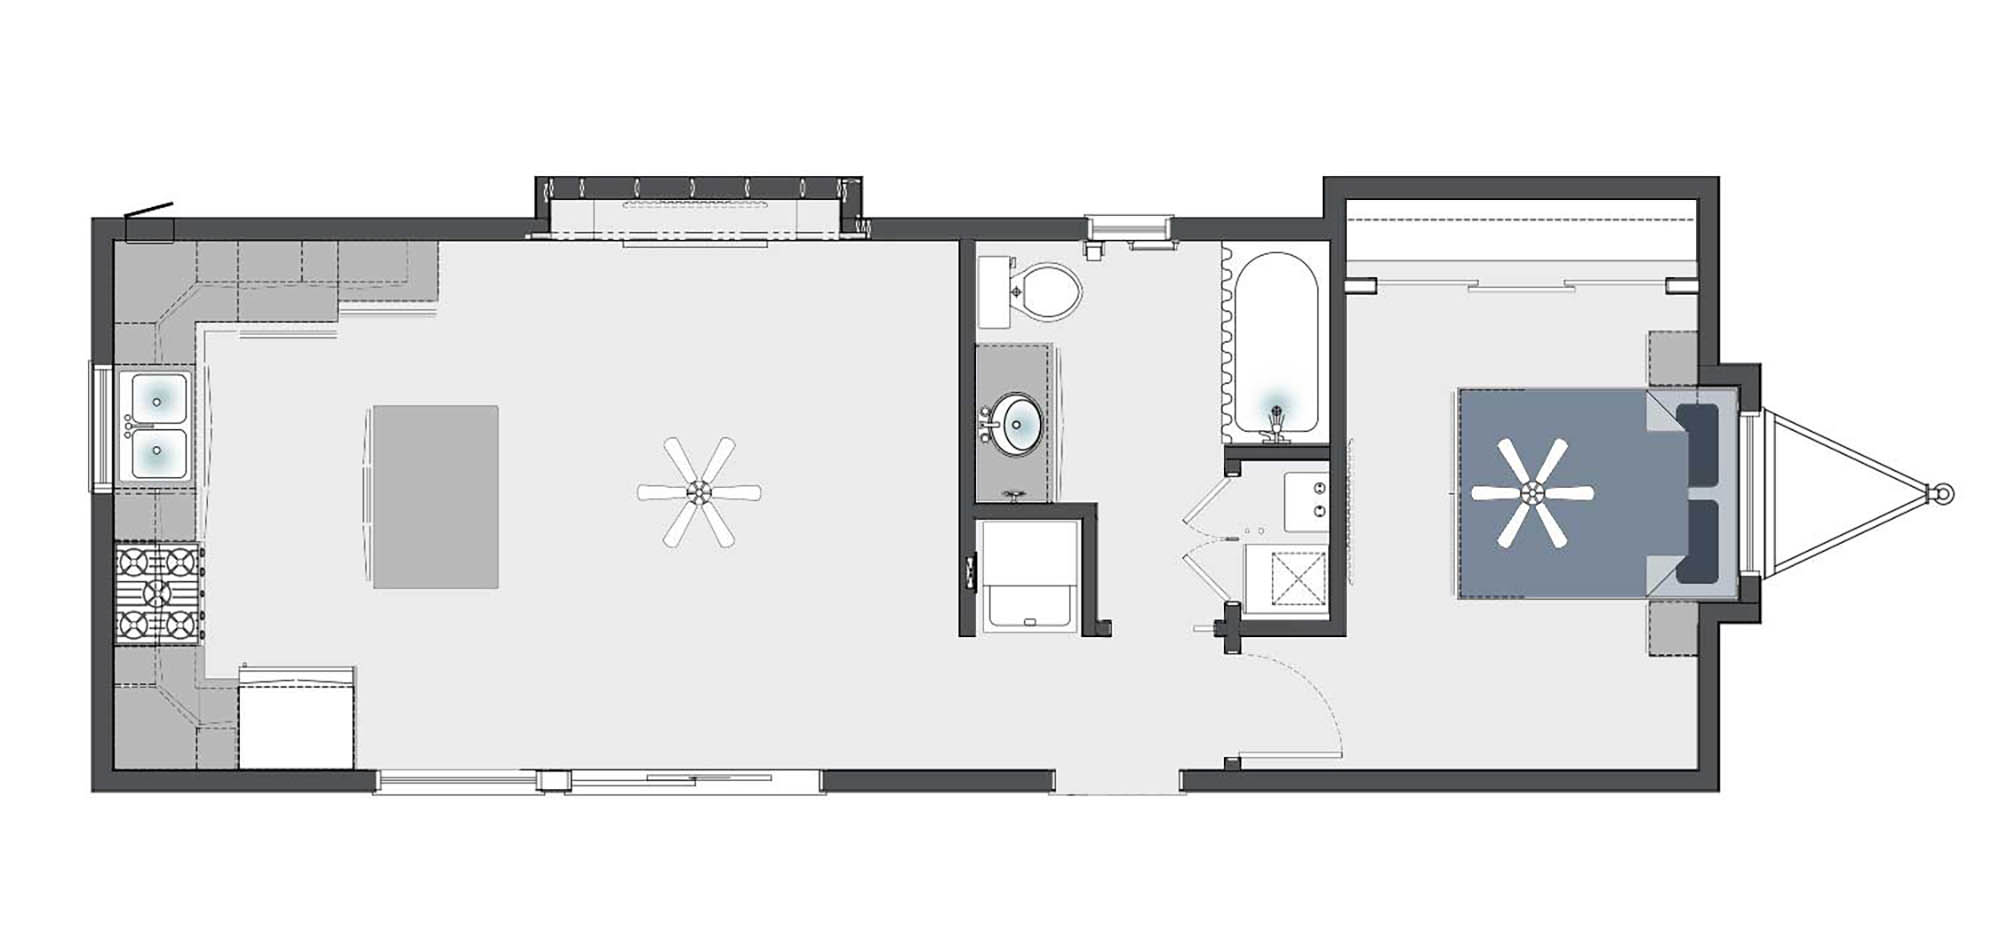 Twin Anchors 1 Bedroom Modular Home - The Anstey